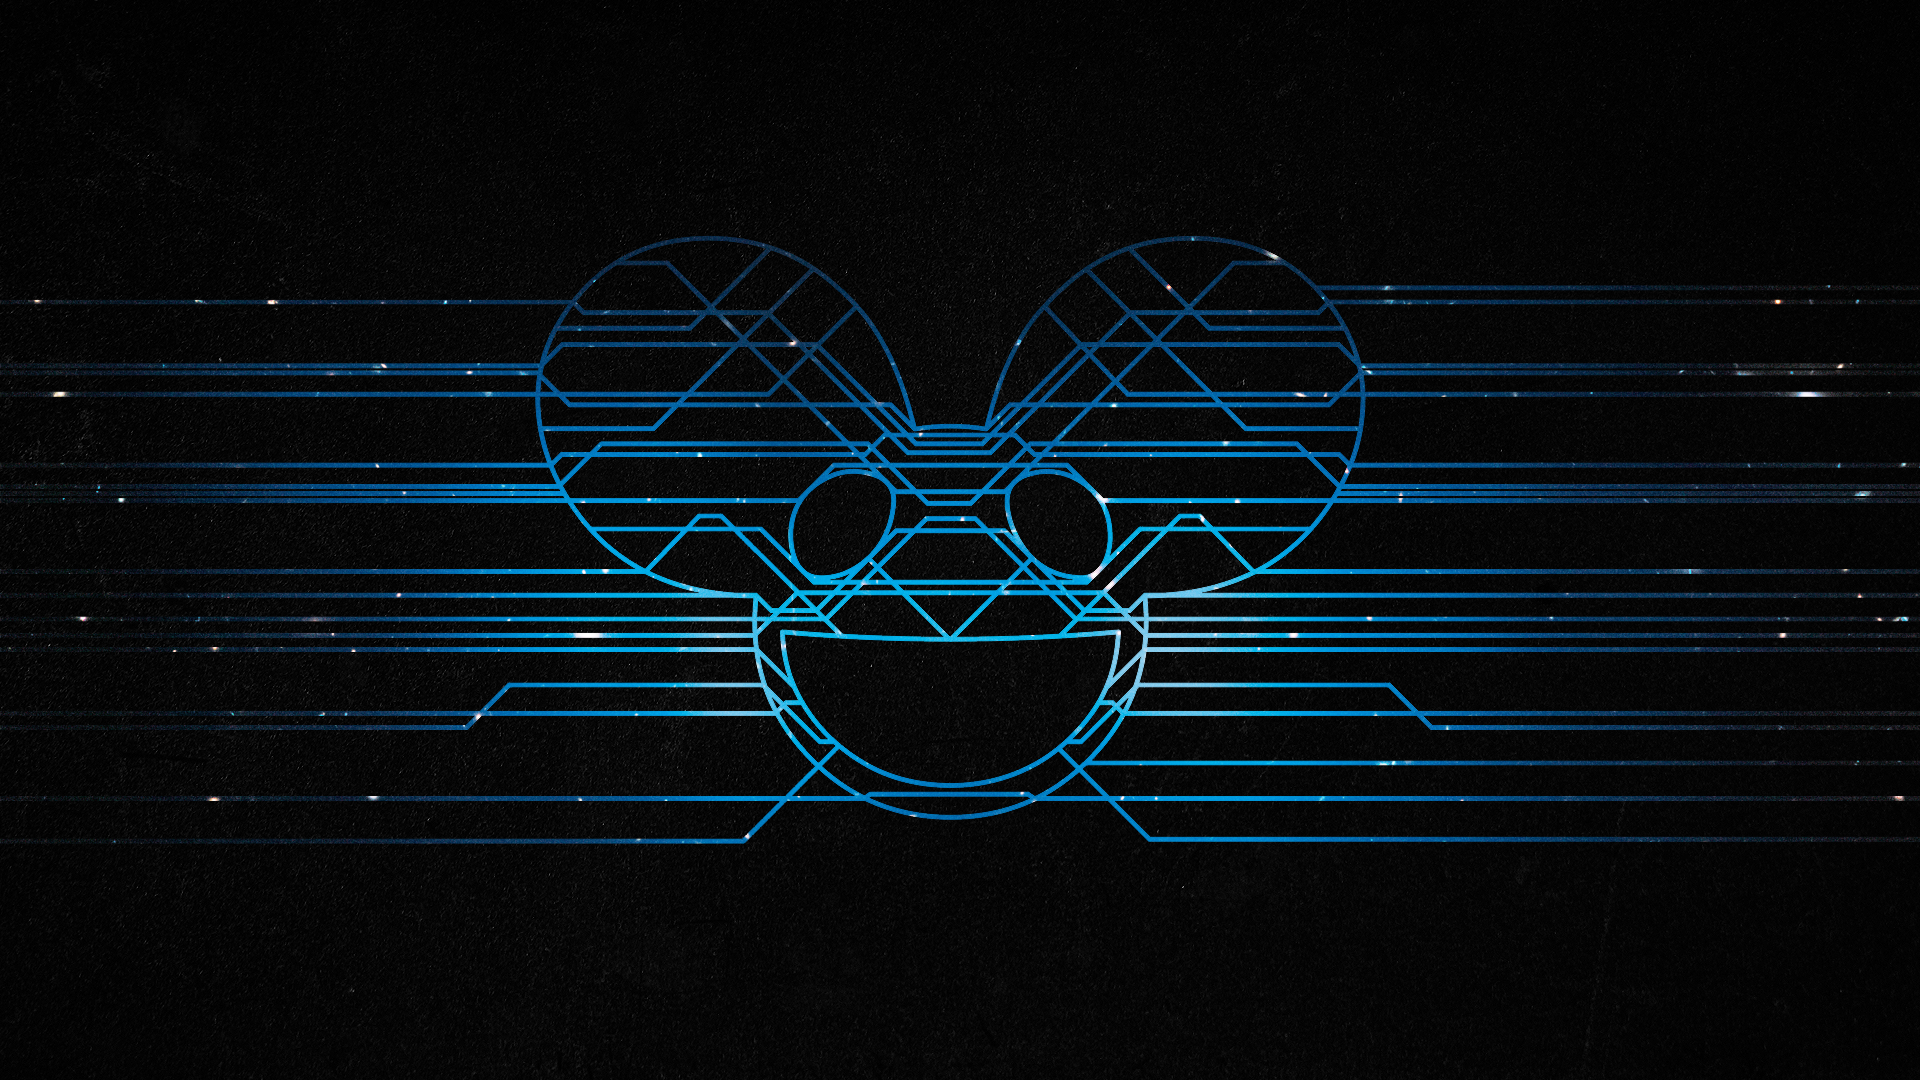 10 Deadmau5 Wallpapers To Download